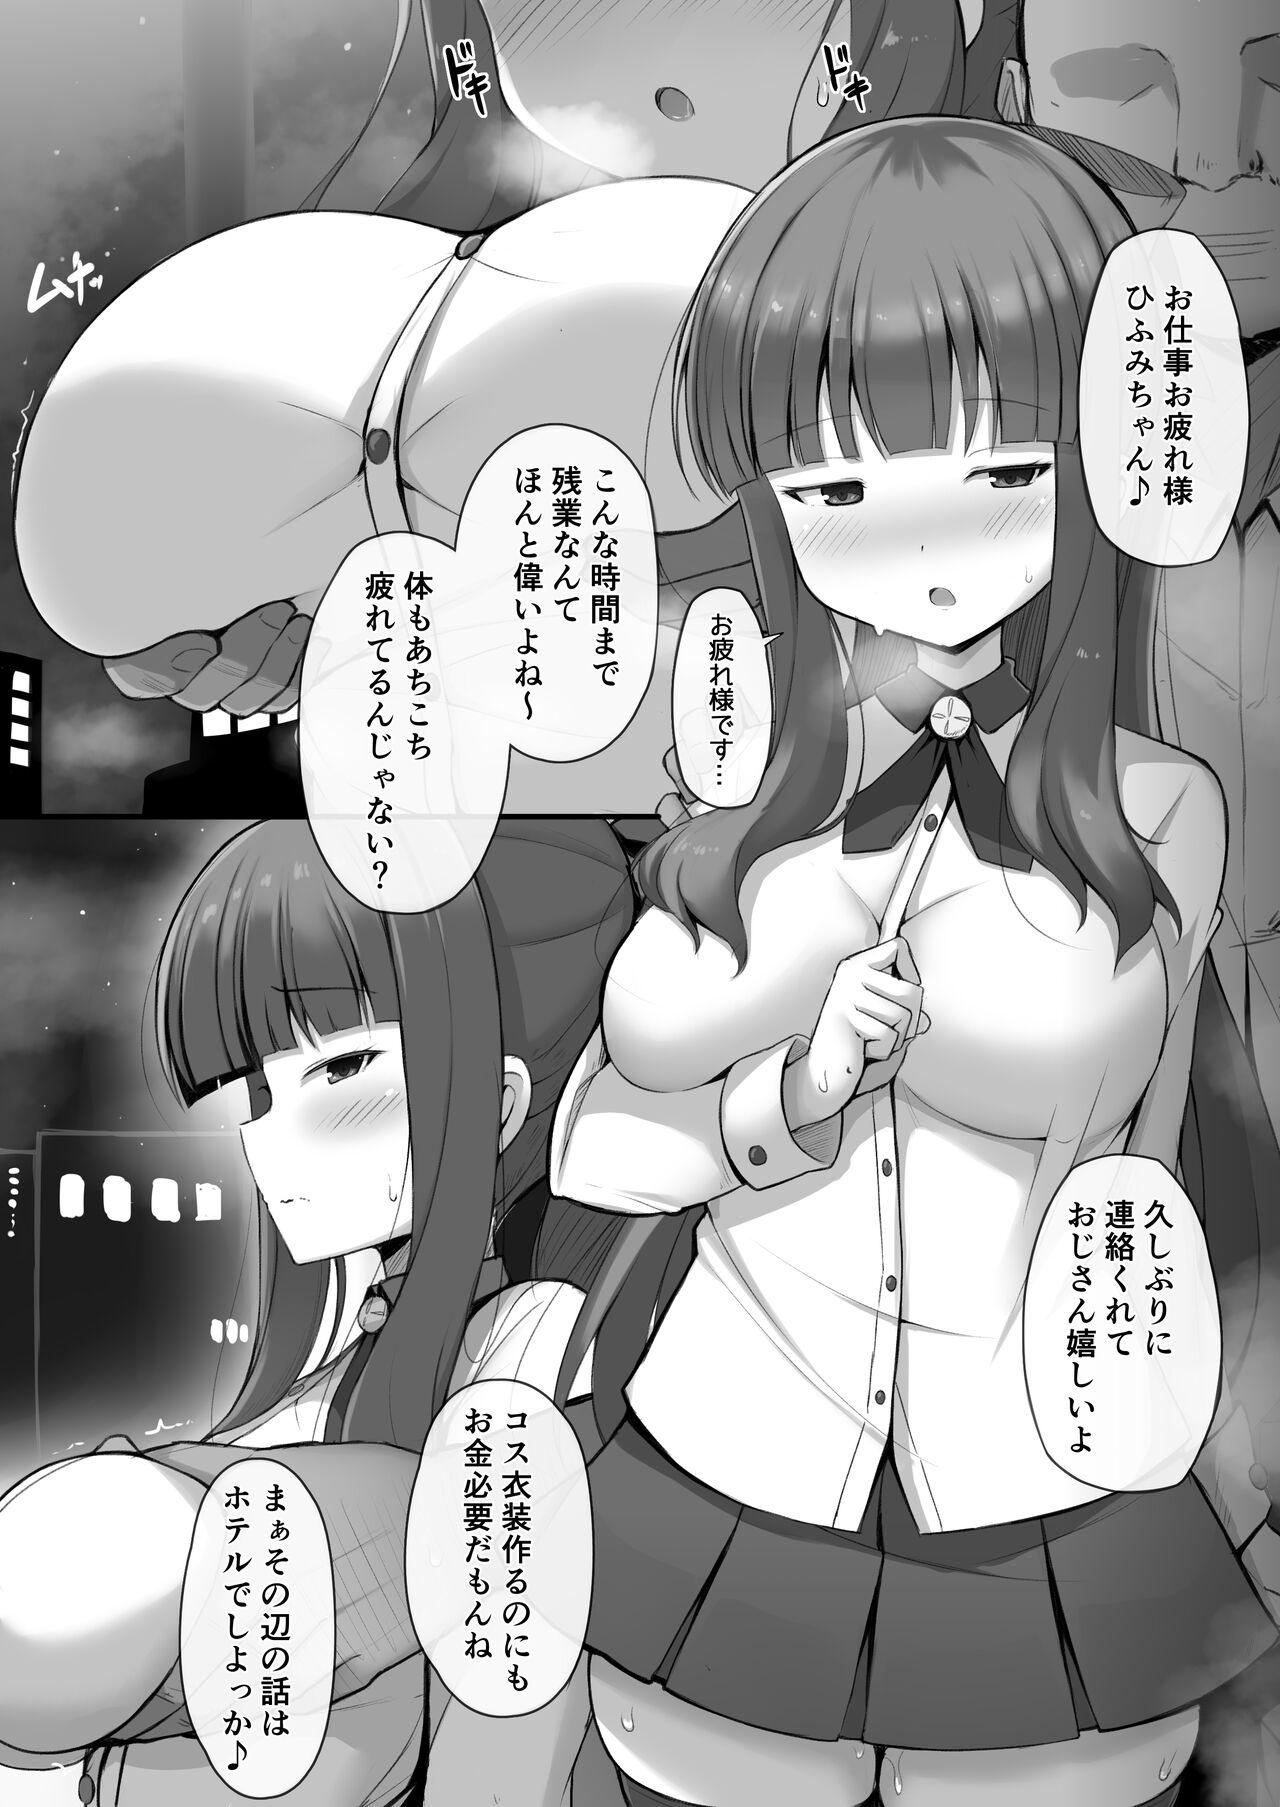 The ひふみんパパ活漫画 - New game Solo Female - Page 1